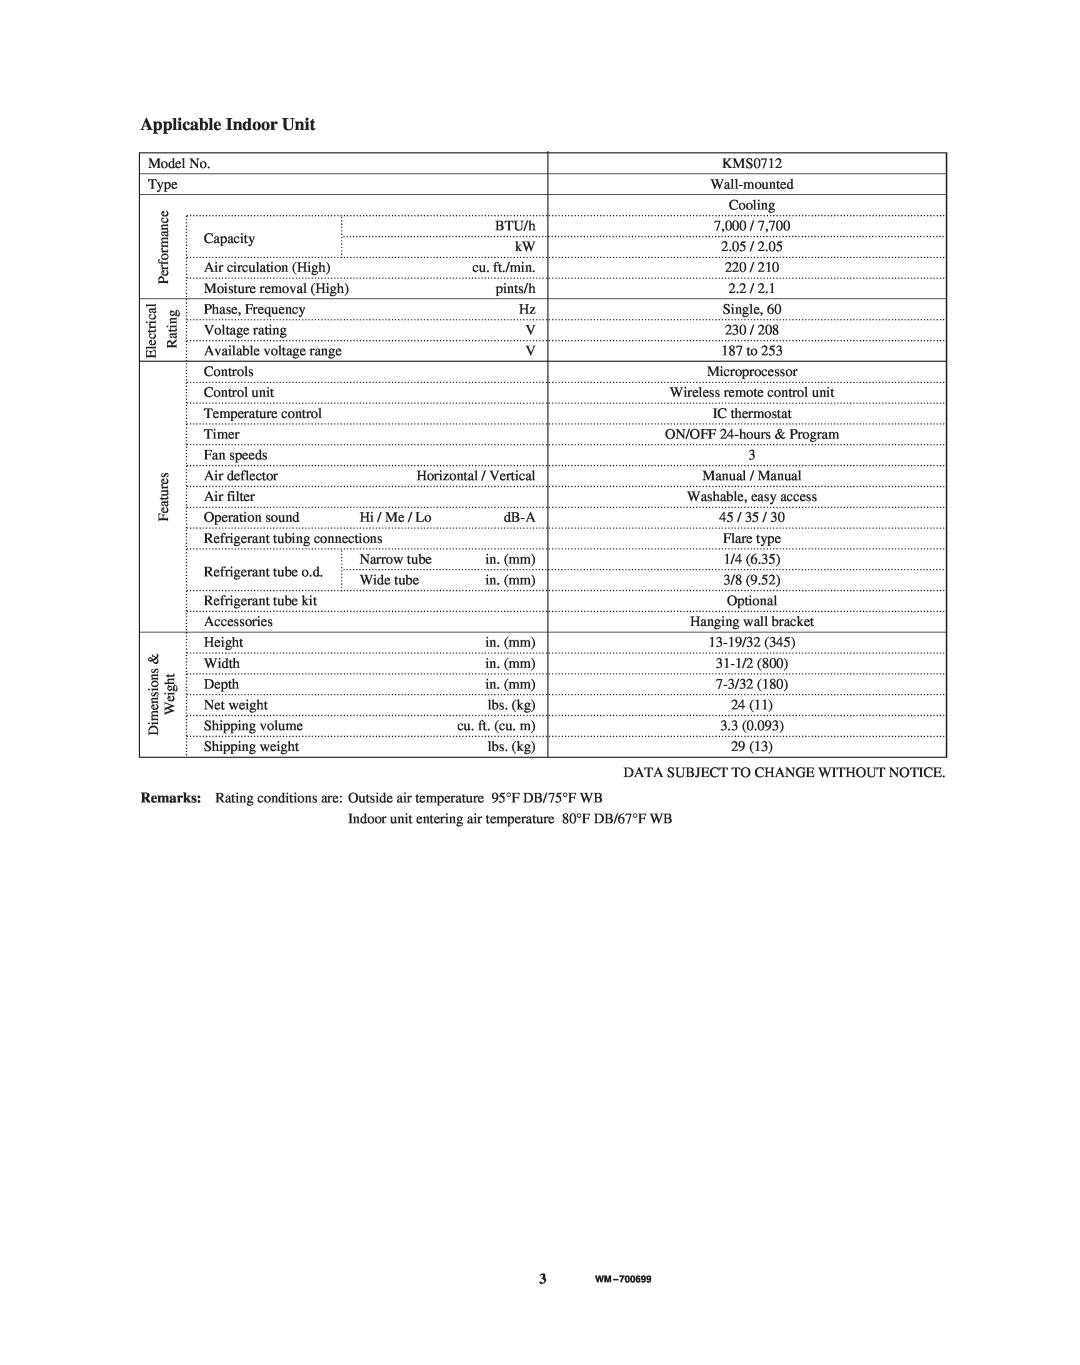 Sanyo KMS1812, KMS0712, CM3212 service manual Applicable Indoor Unit 